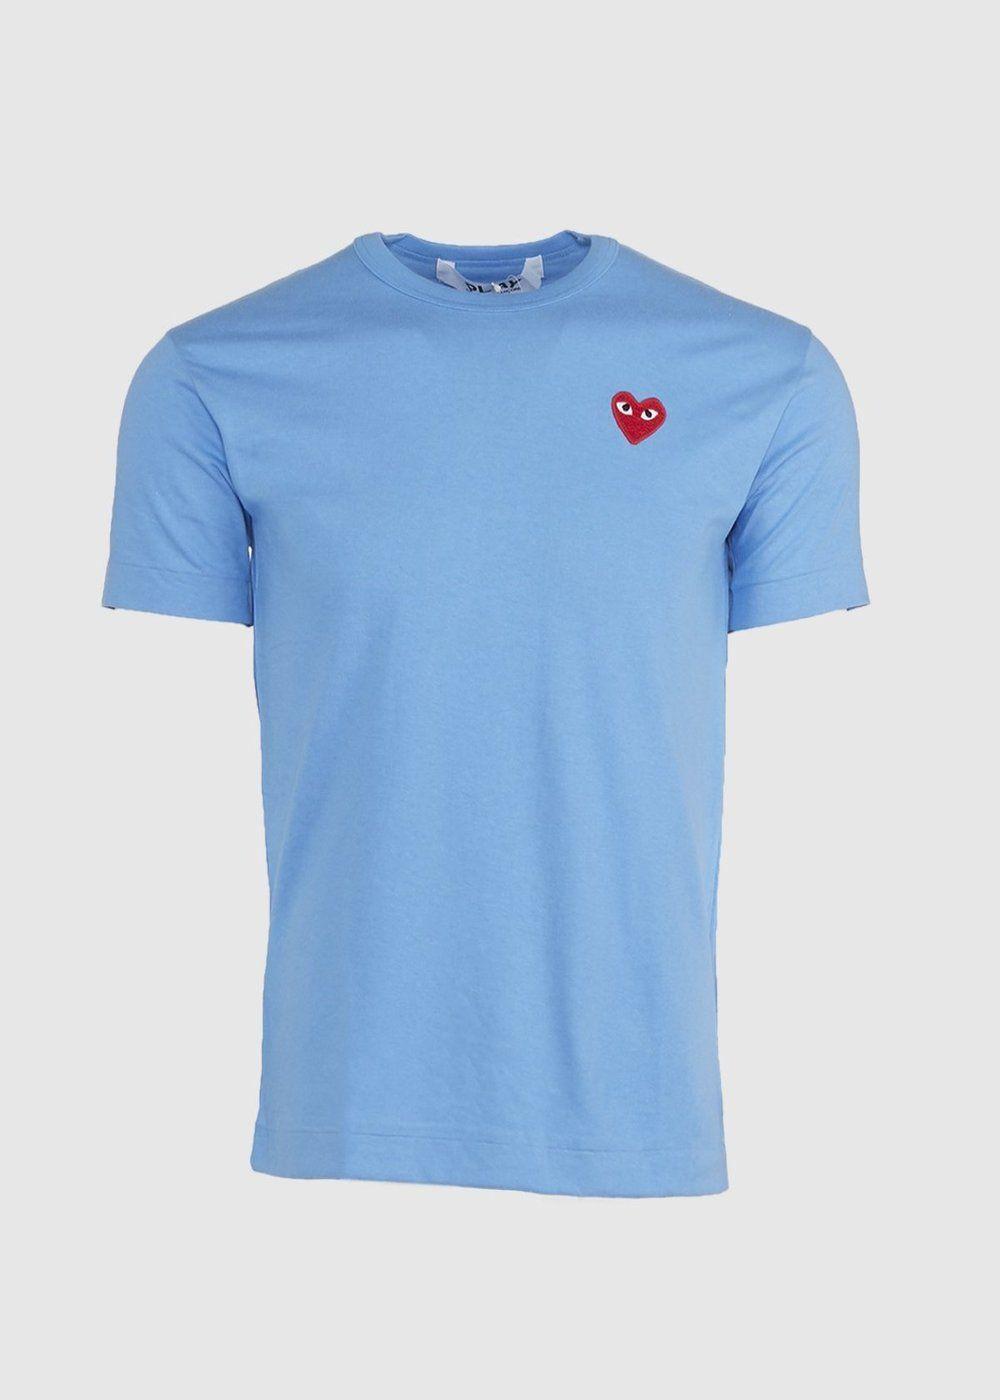 Short Red and Blue Logo - CDG PLAY: LOGO TEE SHORT SLEEVE [LIGHT BLUE RED]